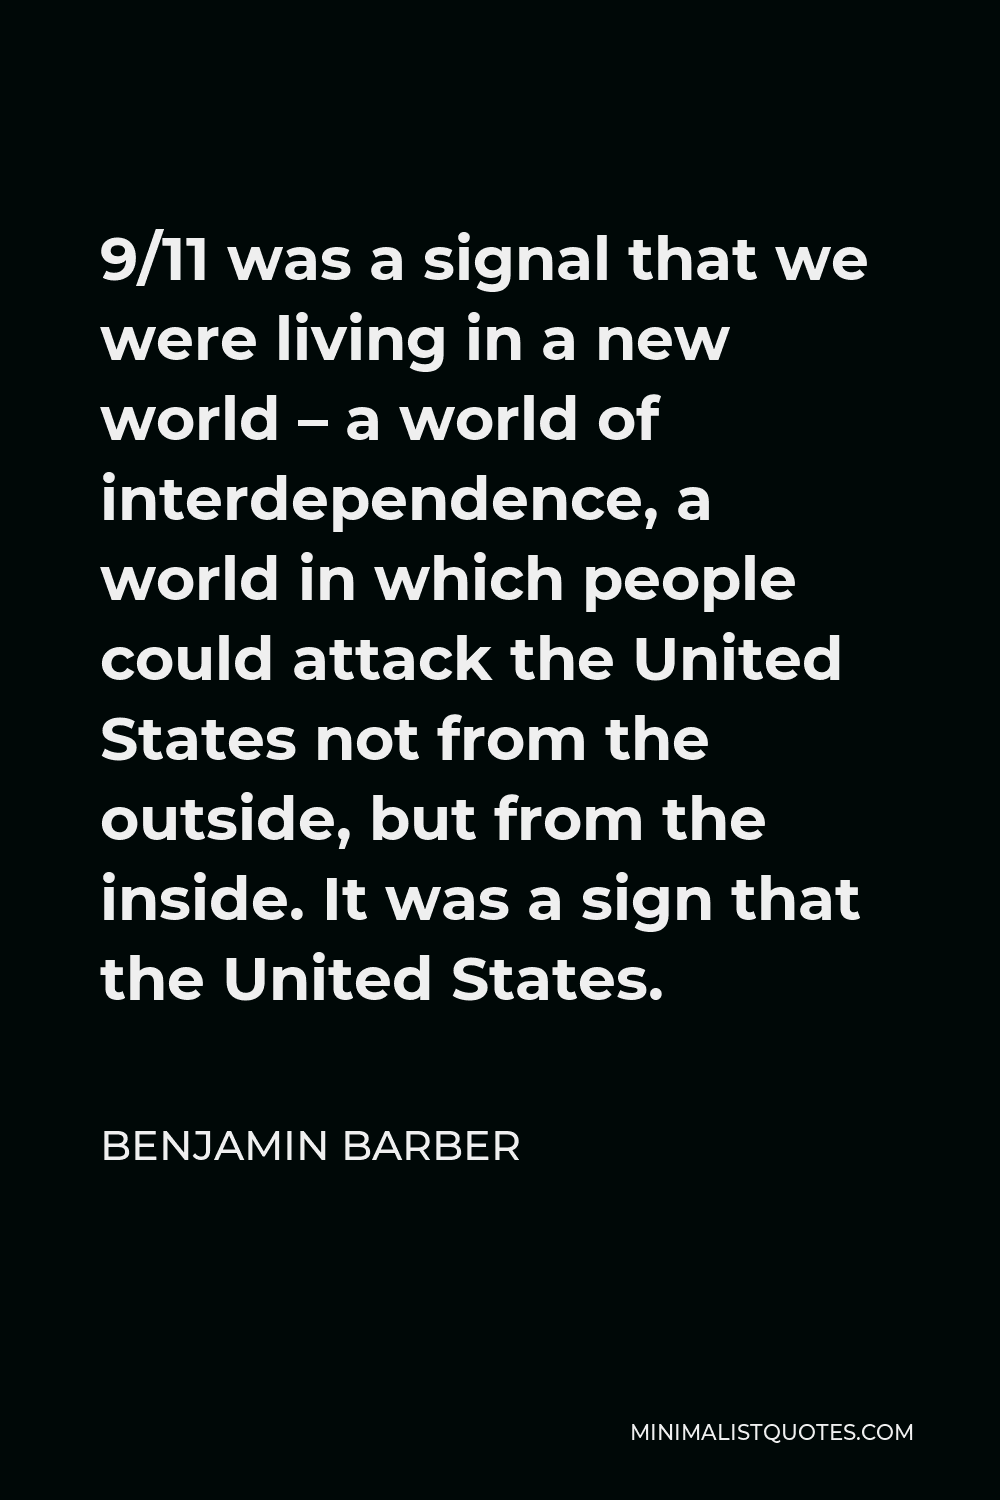 Benjamin Barber Quote - 9/11 was a signal that we were living in a new world – a world of interdependence, a world in which people could attack the United States not from the outside, but from the inside. It was a sign that the United States.